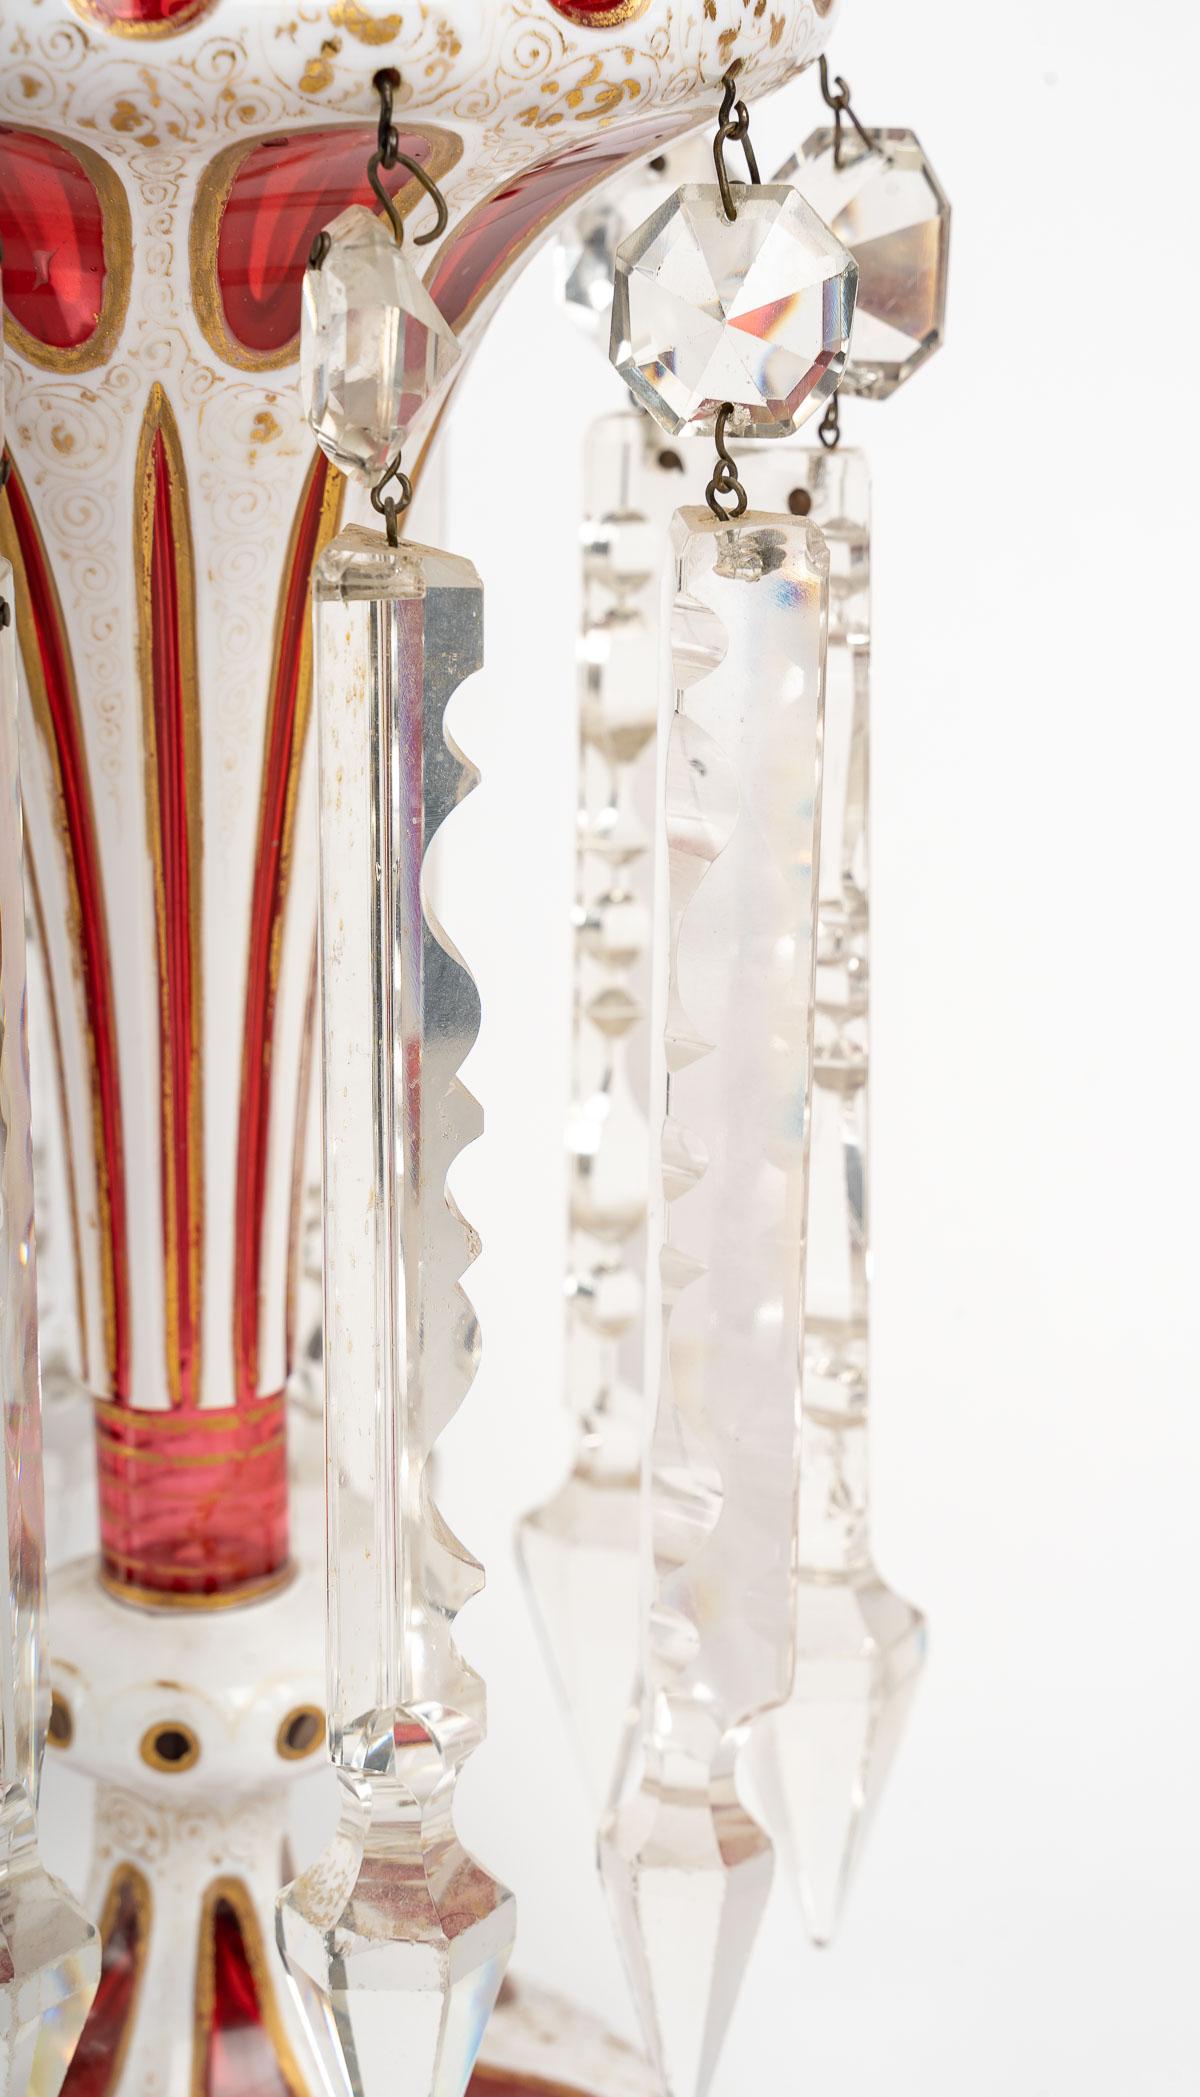 Pair of crystal pineapple holders, 19th century
Pair of Bohemian crystal pineapple holders with red and white overlay and large crystal pendants, 19th century, Napoleon III period.
H: 28 cm, d: 14 cm
ref 3271